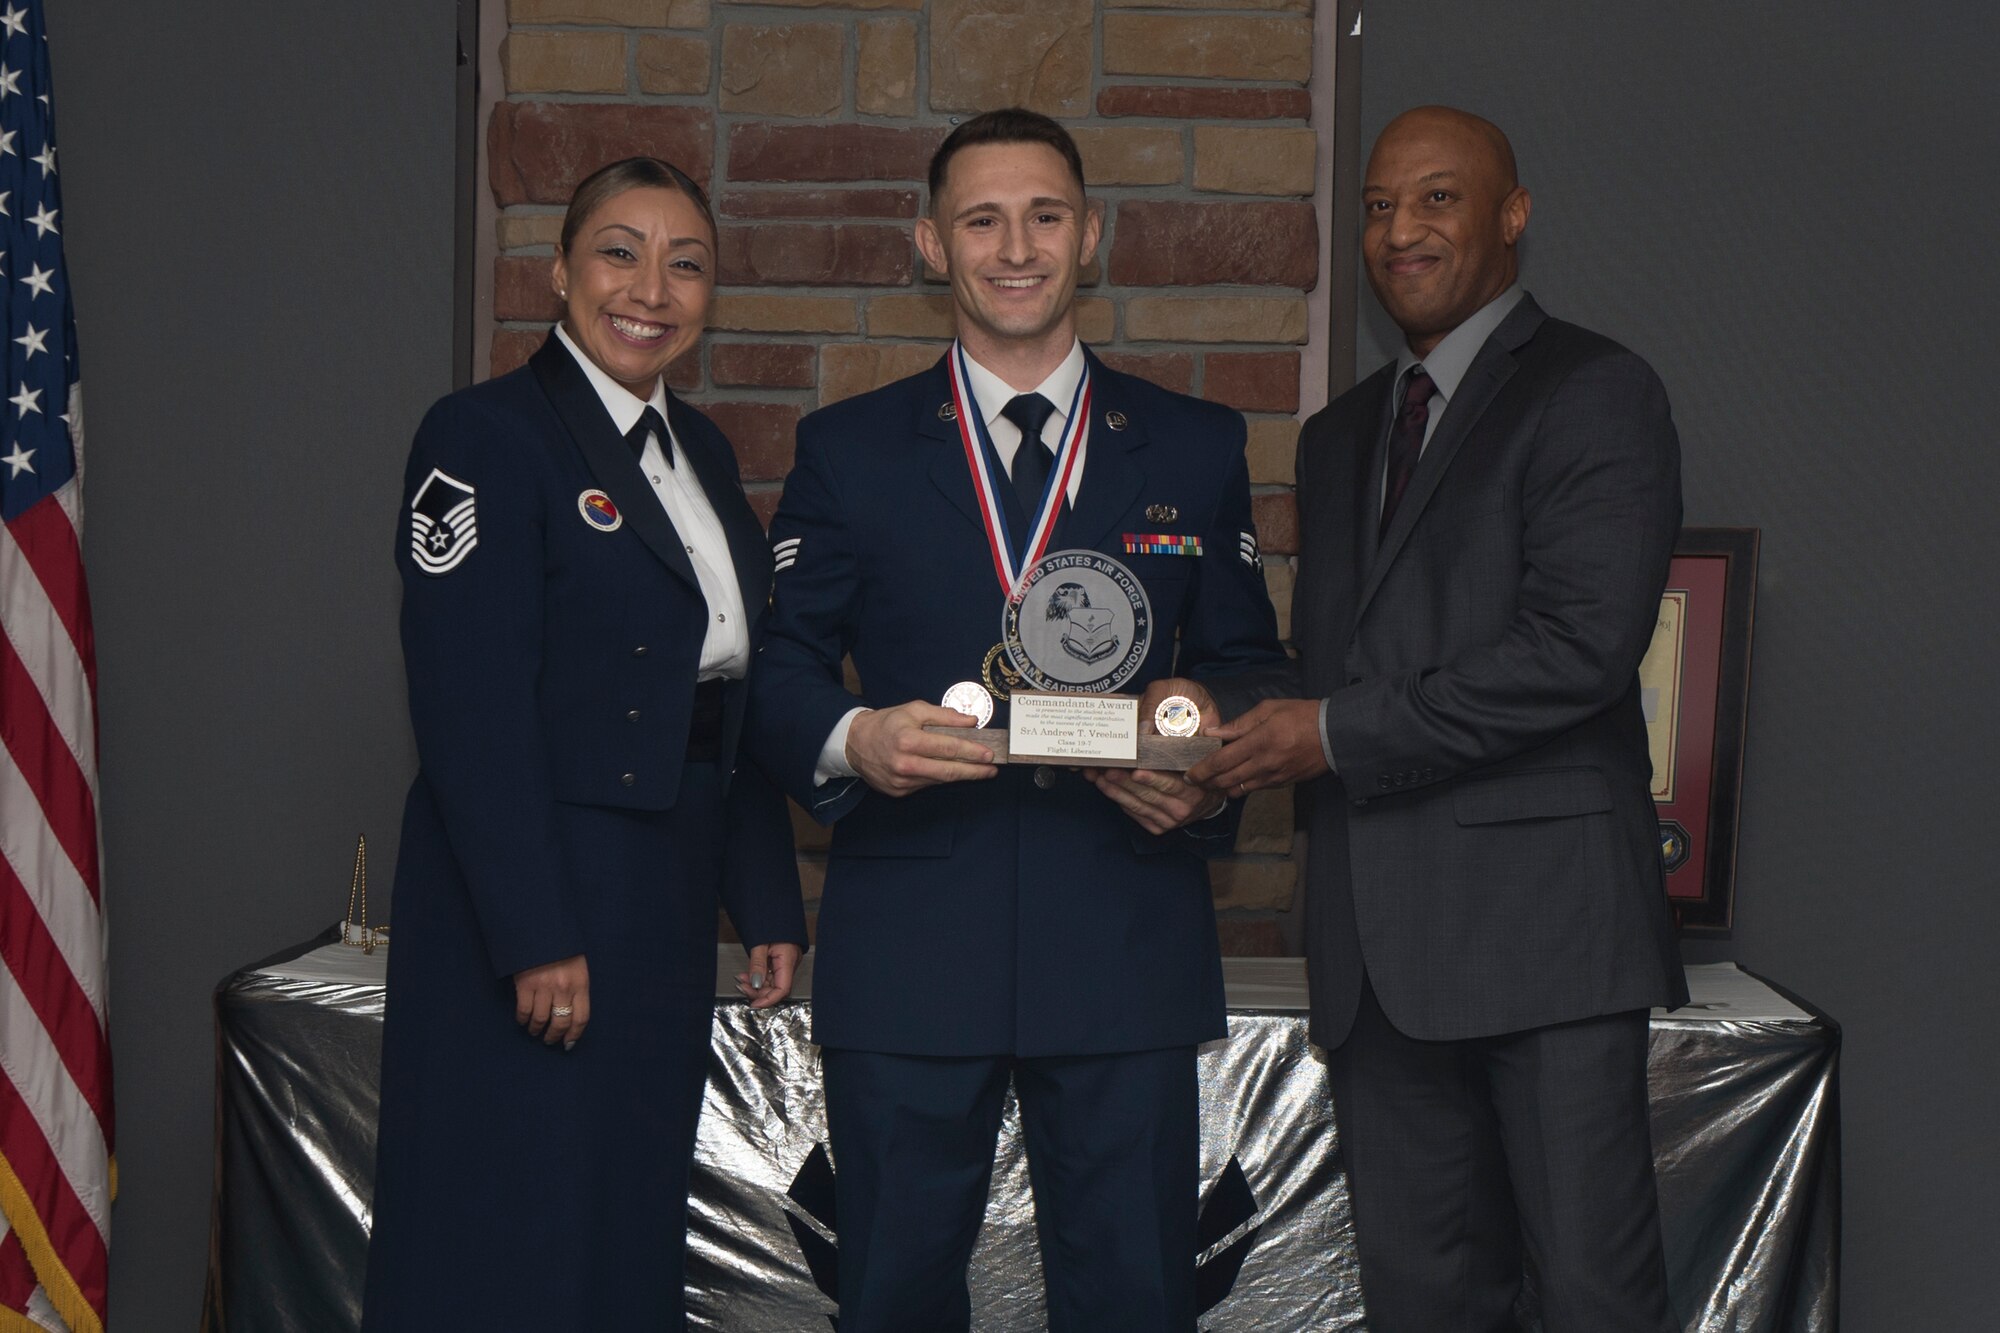 Senior Airman Andrew Vreeland, Airman Leadership School graduate, accepts the commandant leadership award during the graduation of ALS class 19-7, October 10, 2019, on Holloman Air Force Base, N.M. The commandant leadership award is selected by the ALS commandant, and is presented to the student who demonstrates the characteristics of an effective leader. (U.S. Air Force photo by Airman 1st Class Kristin Weathersby)